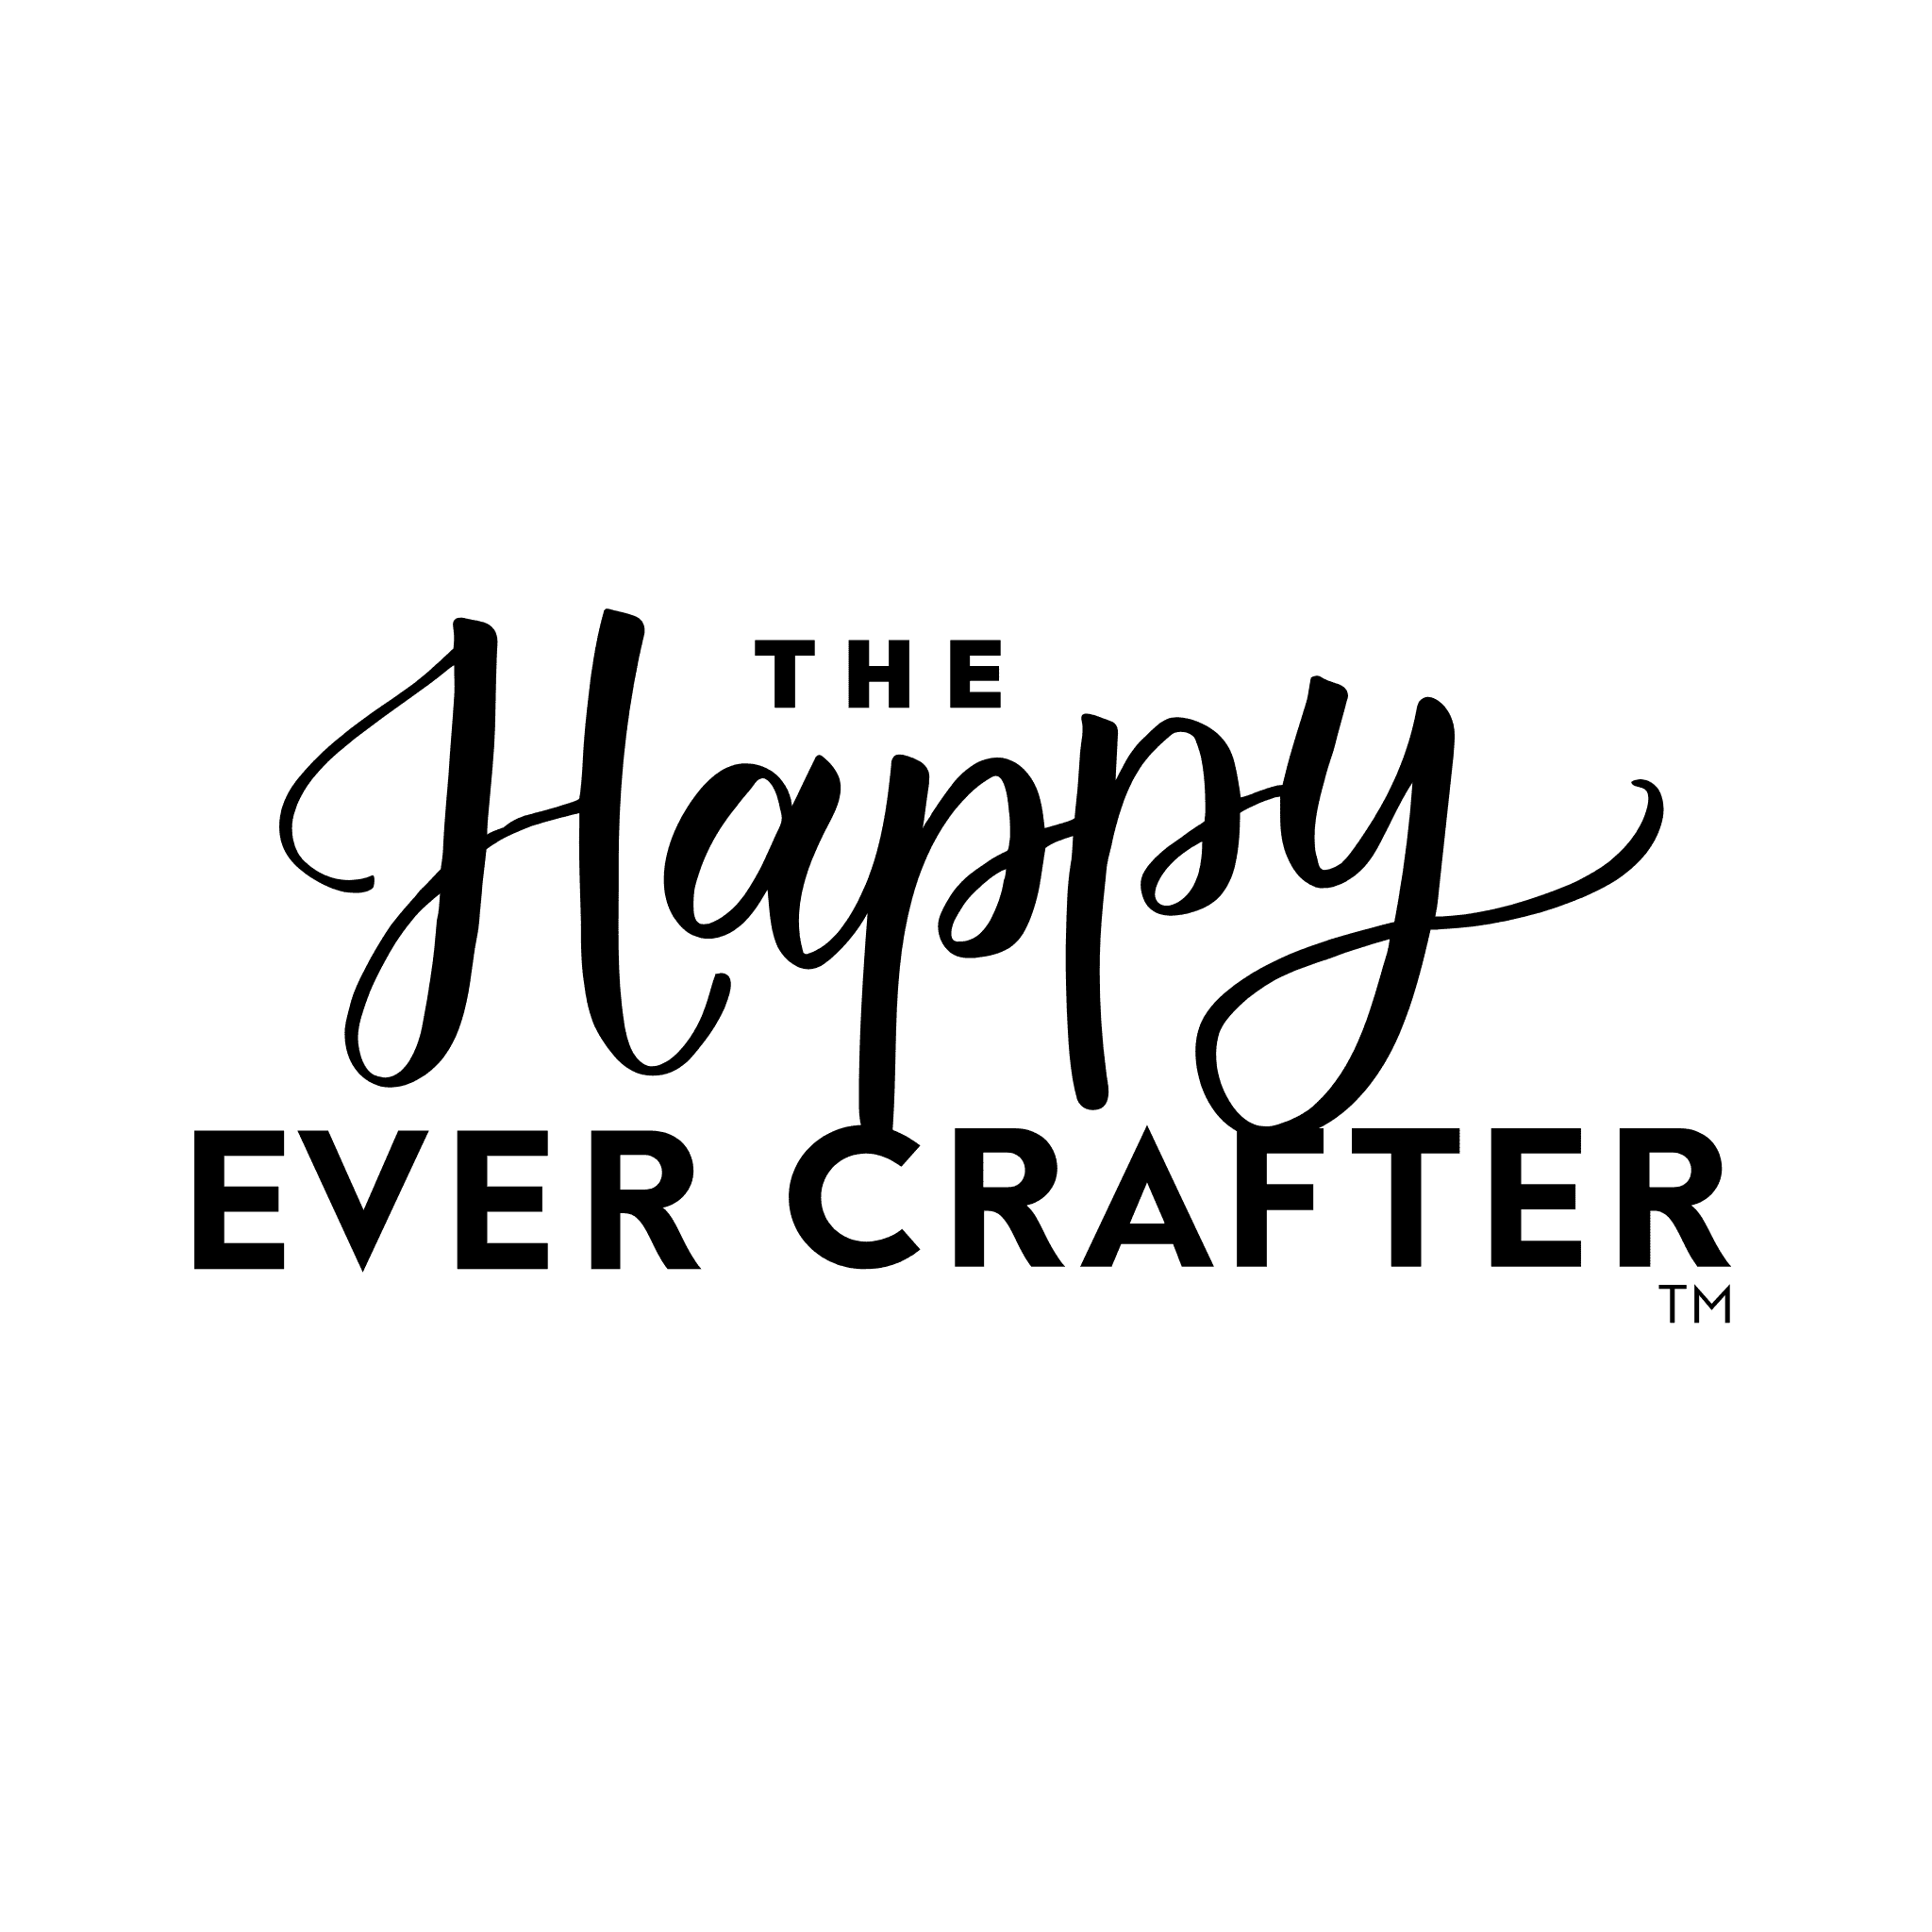 The Happy Ever Crafter